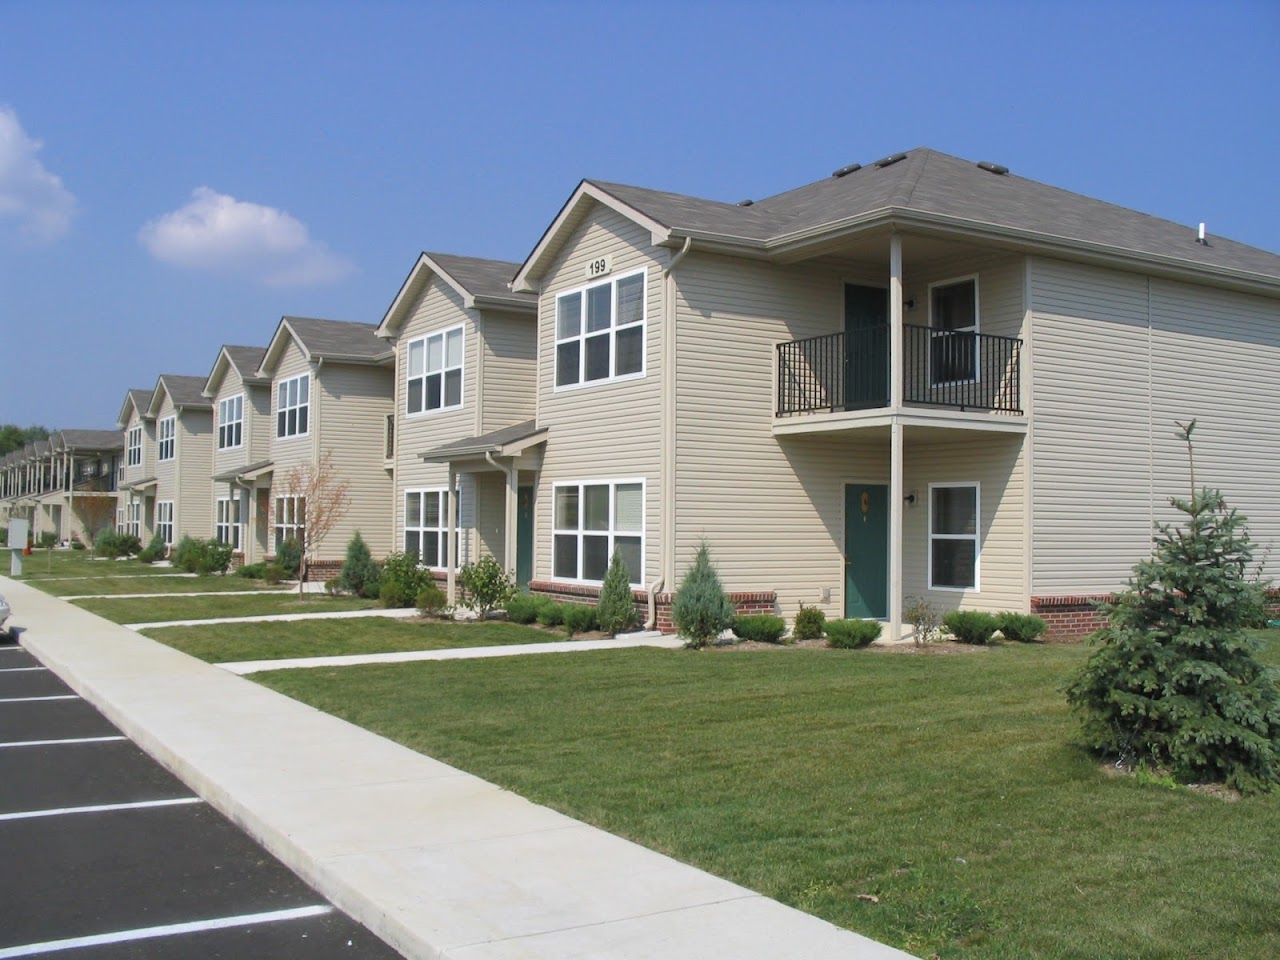 Photo of WHISPERING PINES APTS PHASE I (COLDWATER). Affordable housing located at 40 WHISPERING PNES COLDWATER, MI 49036